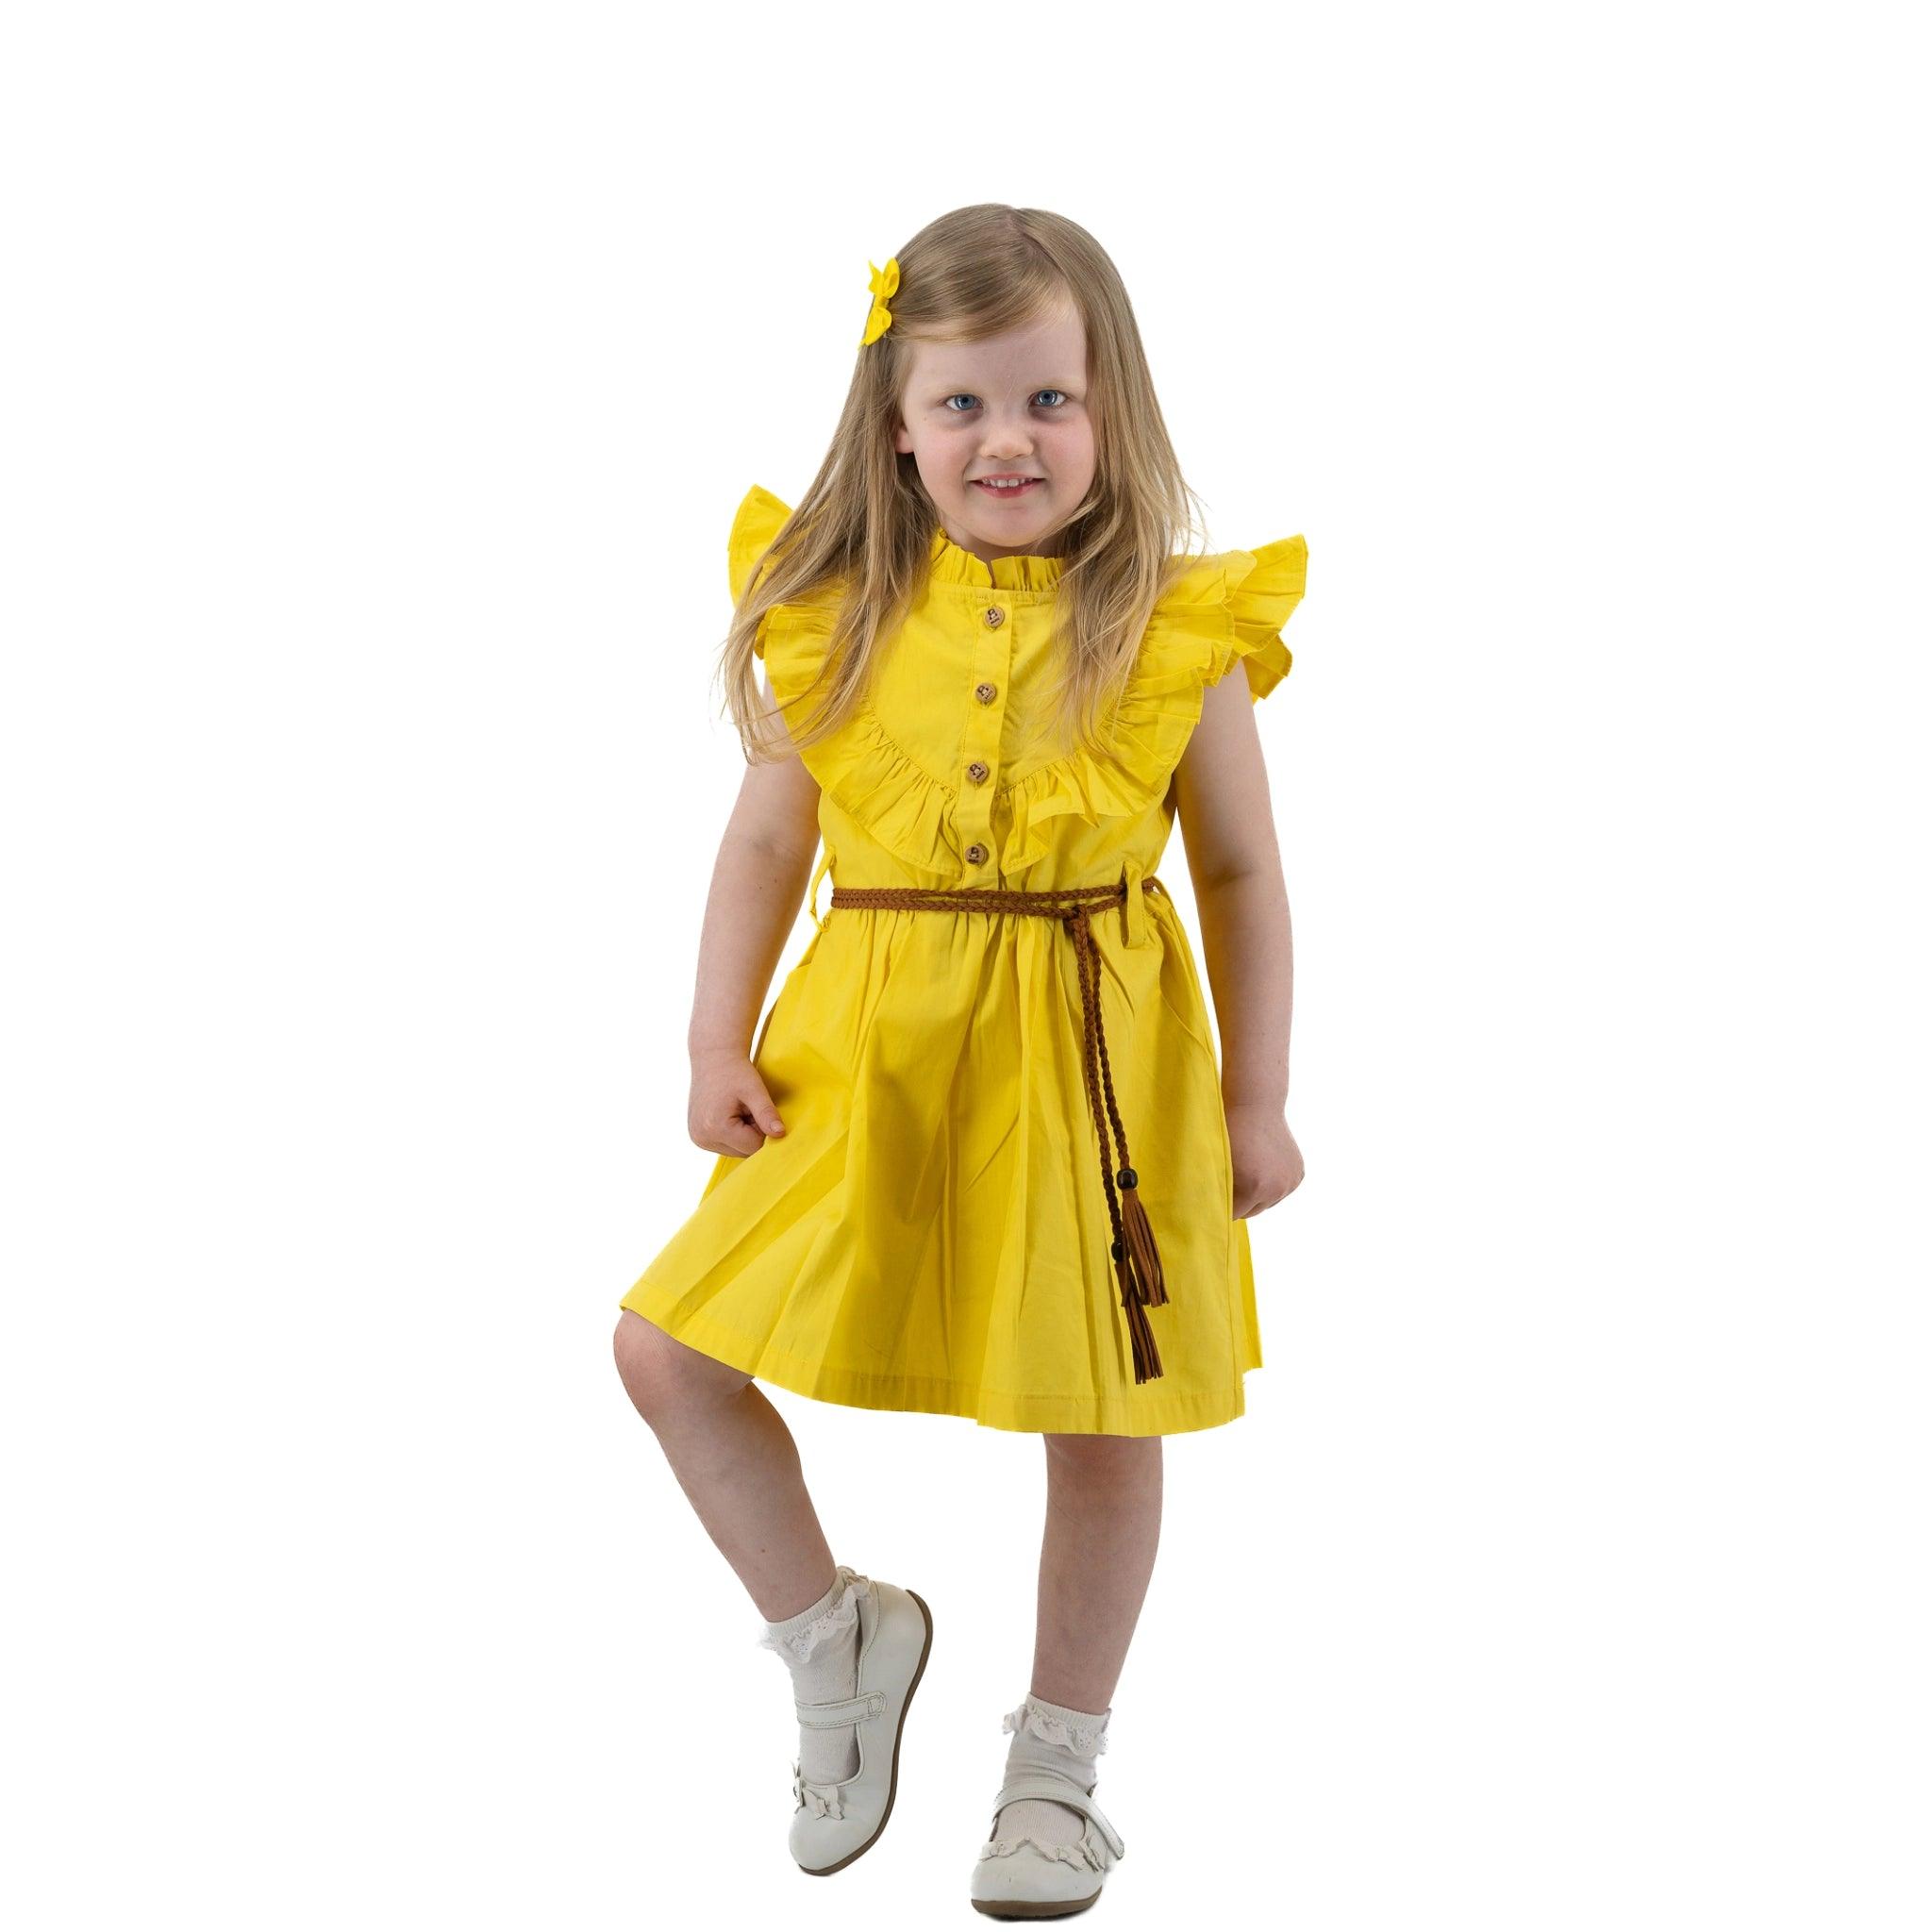 A fashionable little girl in a Karee Yellow Butterfly Sleeve Cotton Dress For Girls posing for a photo.